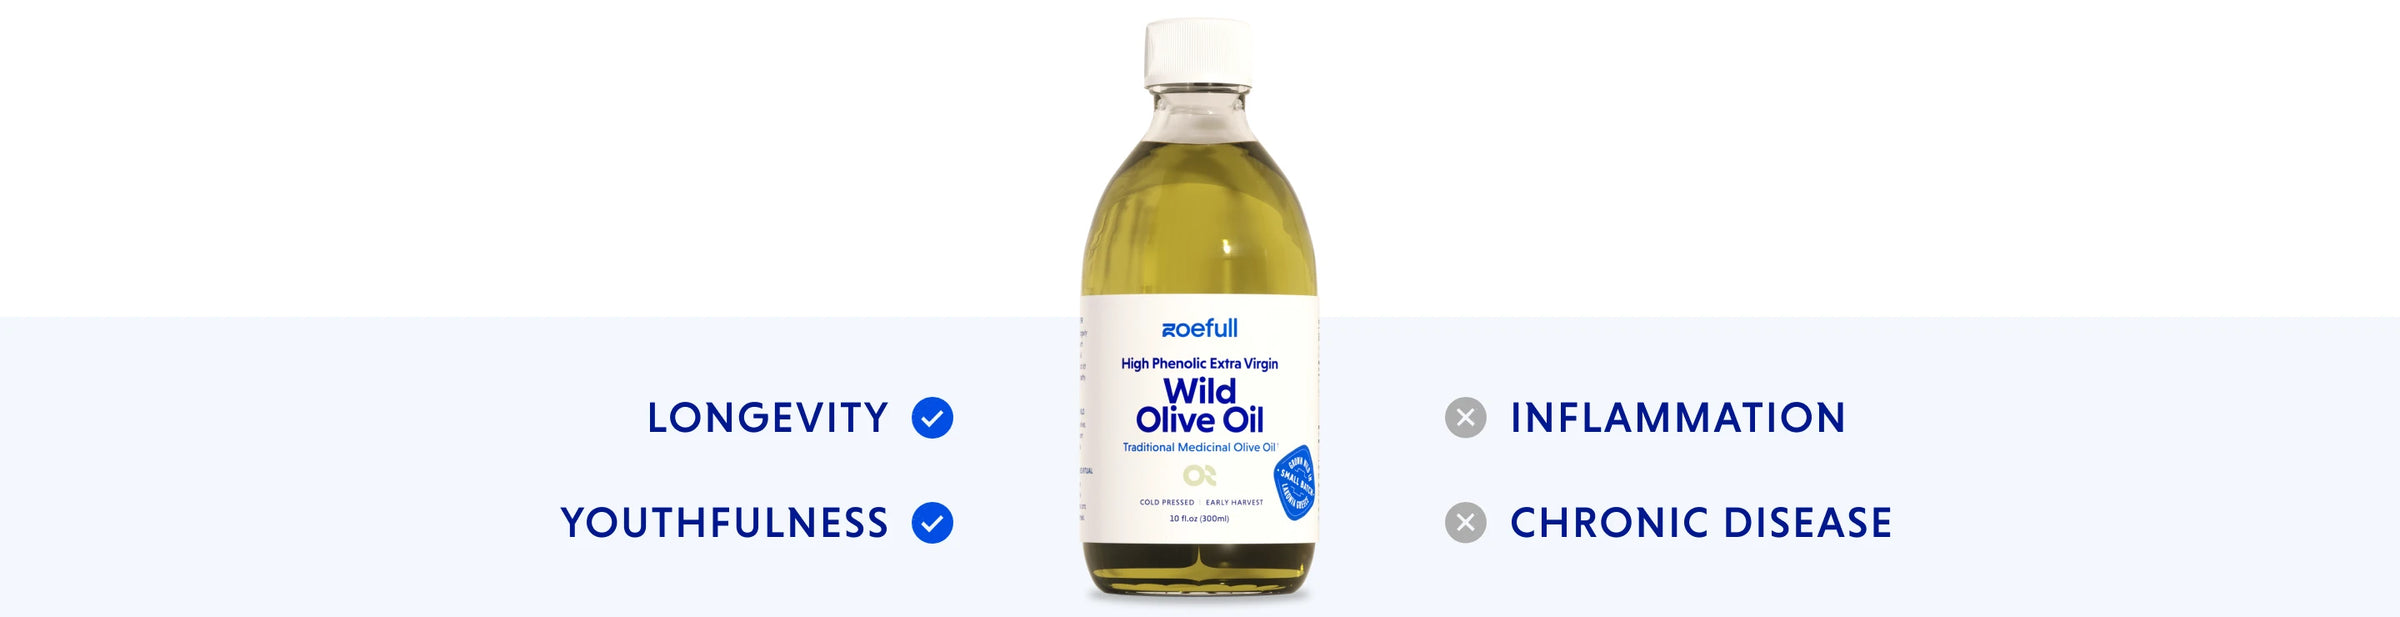 This wild olive oil by zoefull will help you achieve longevity and youthfulness away from inflammation and chronic disease.